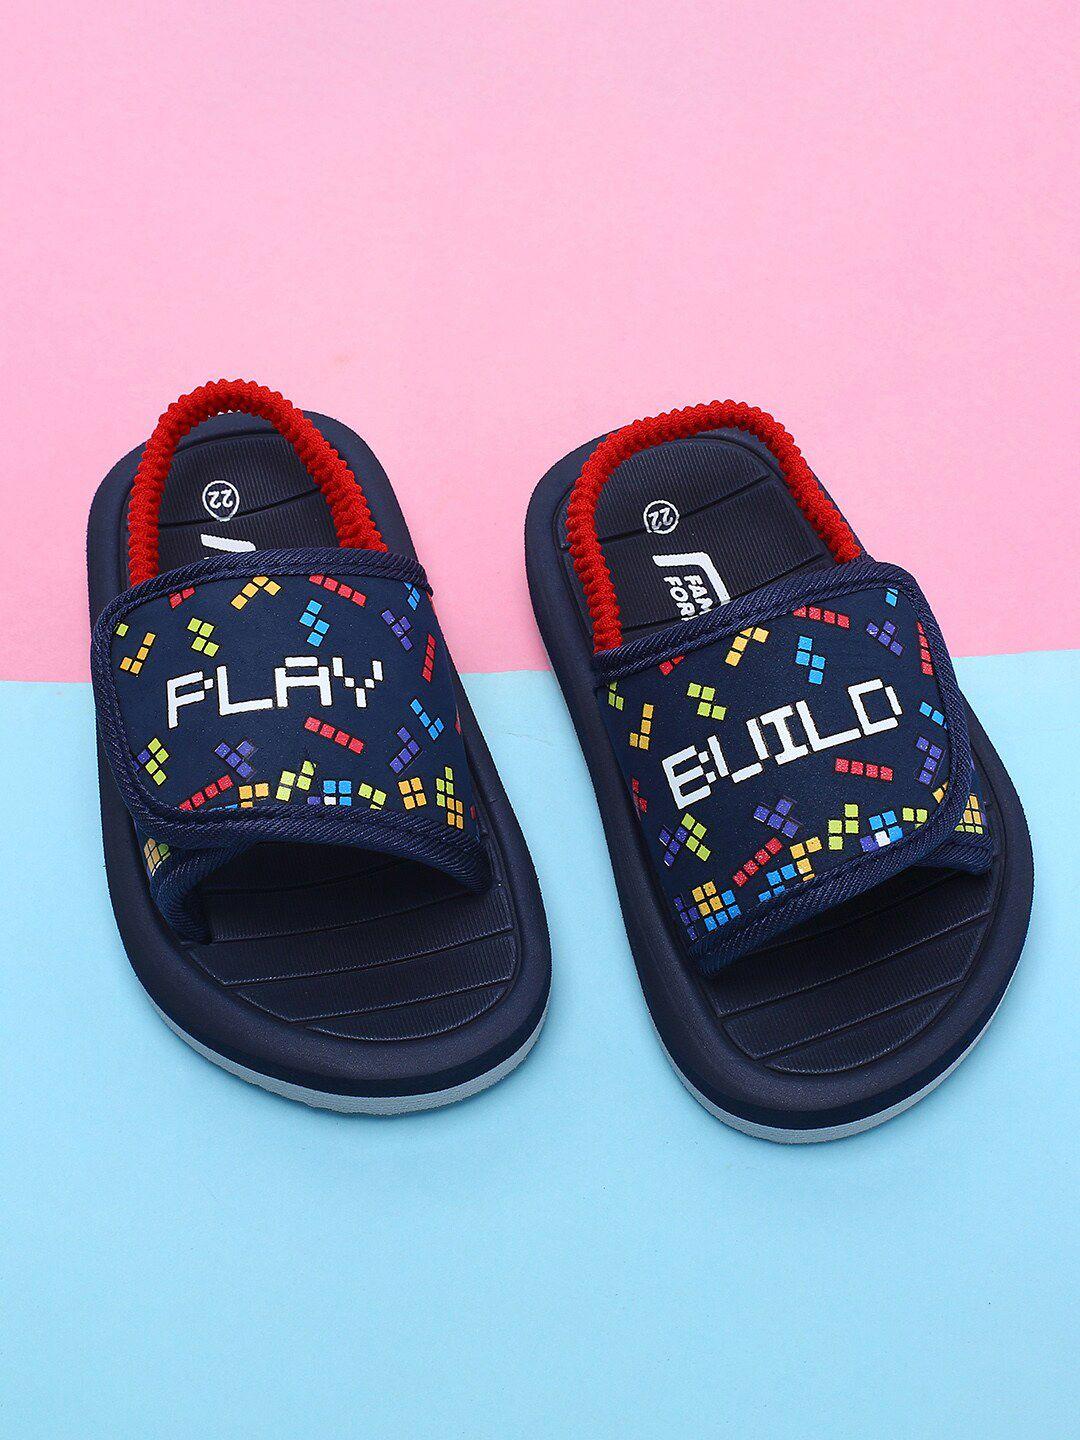 fame-forever-by-lifestyle-boys-navy-blue-&-red-printed-synthetic-sliders-flip-flops